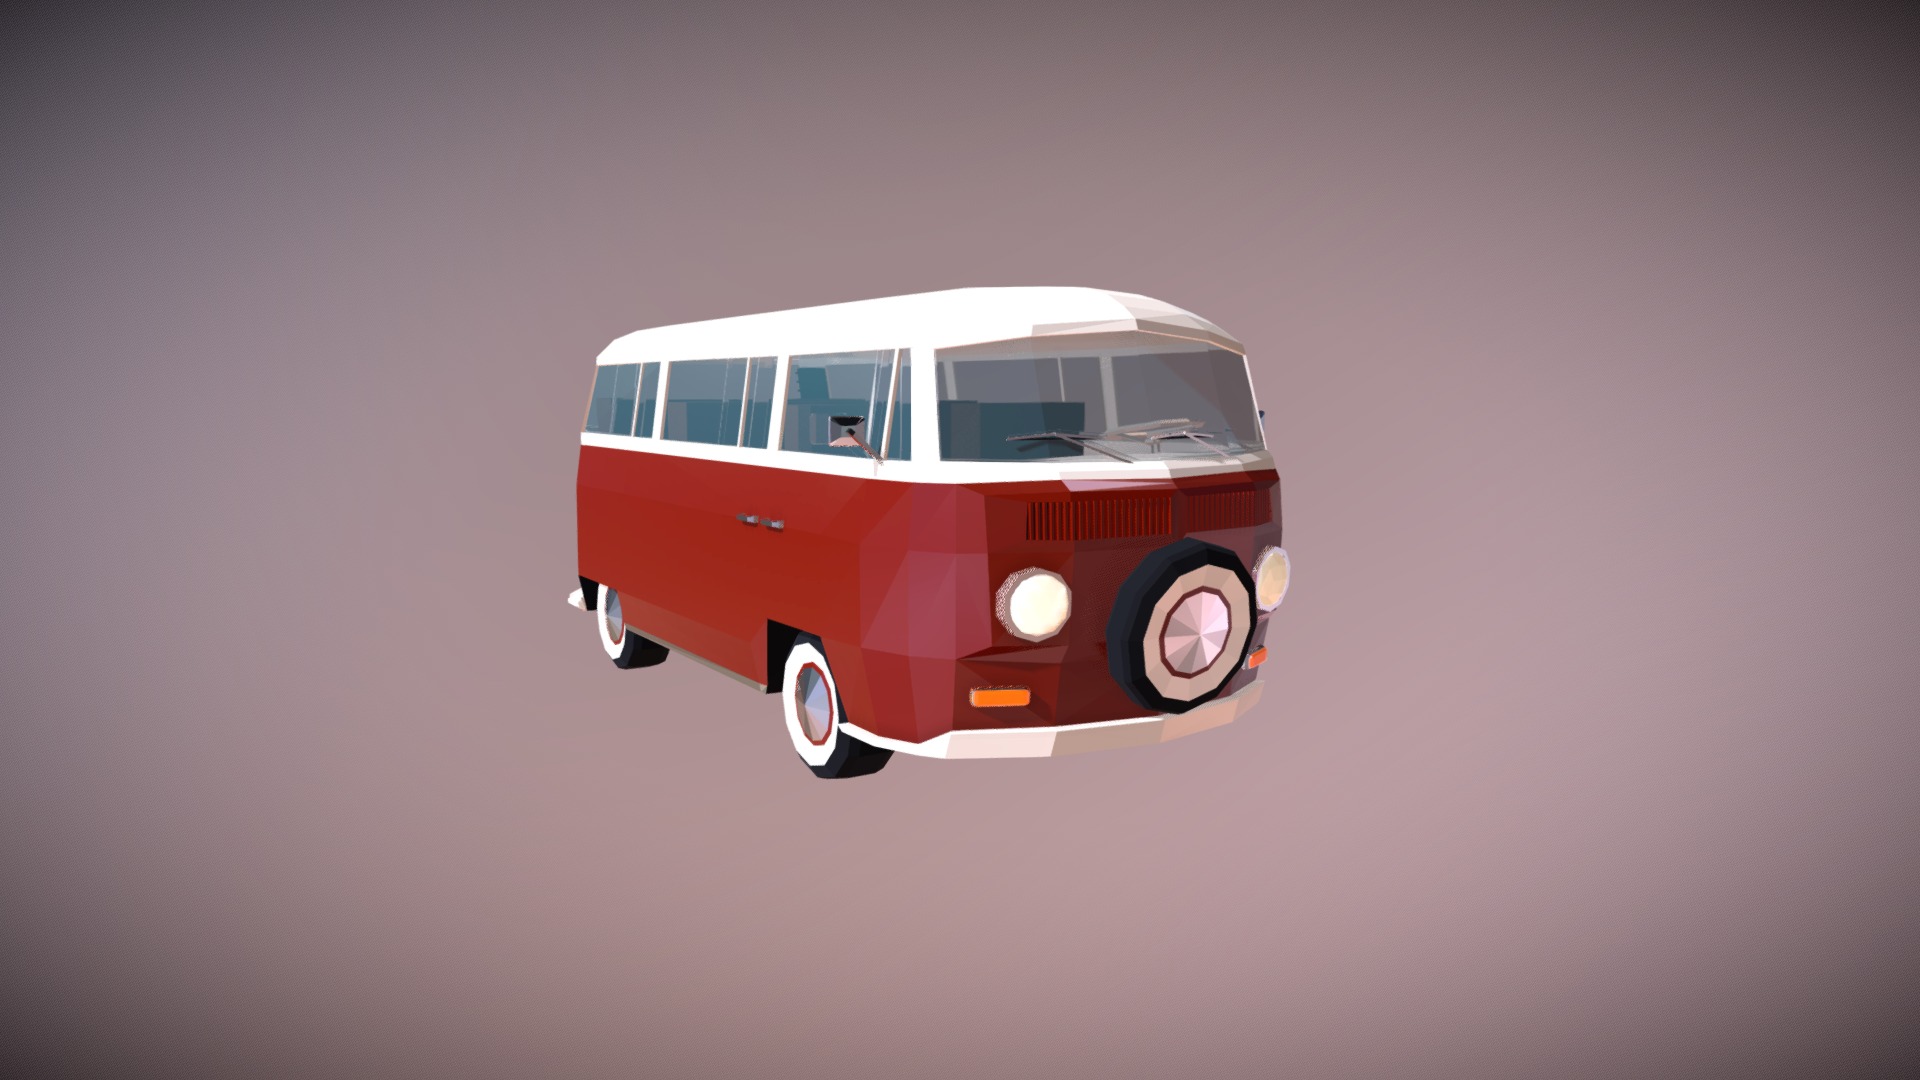 3D model Low Poly Camper Van 02 - This is a 3D model of the Low Poly Camper Van 02. The 3D model is about a red and white bus.